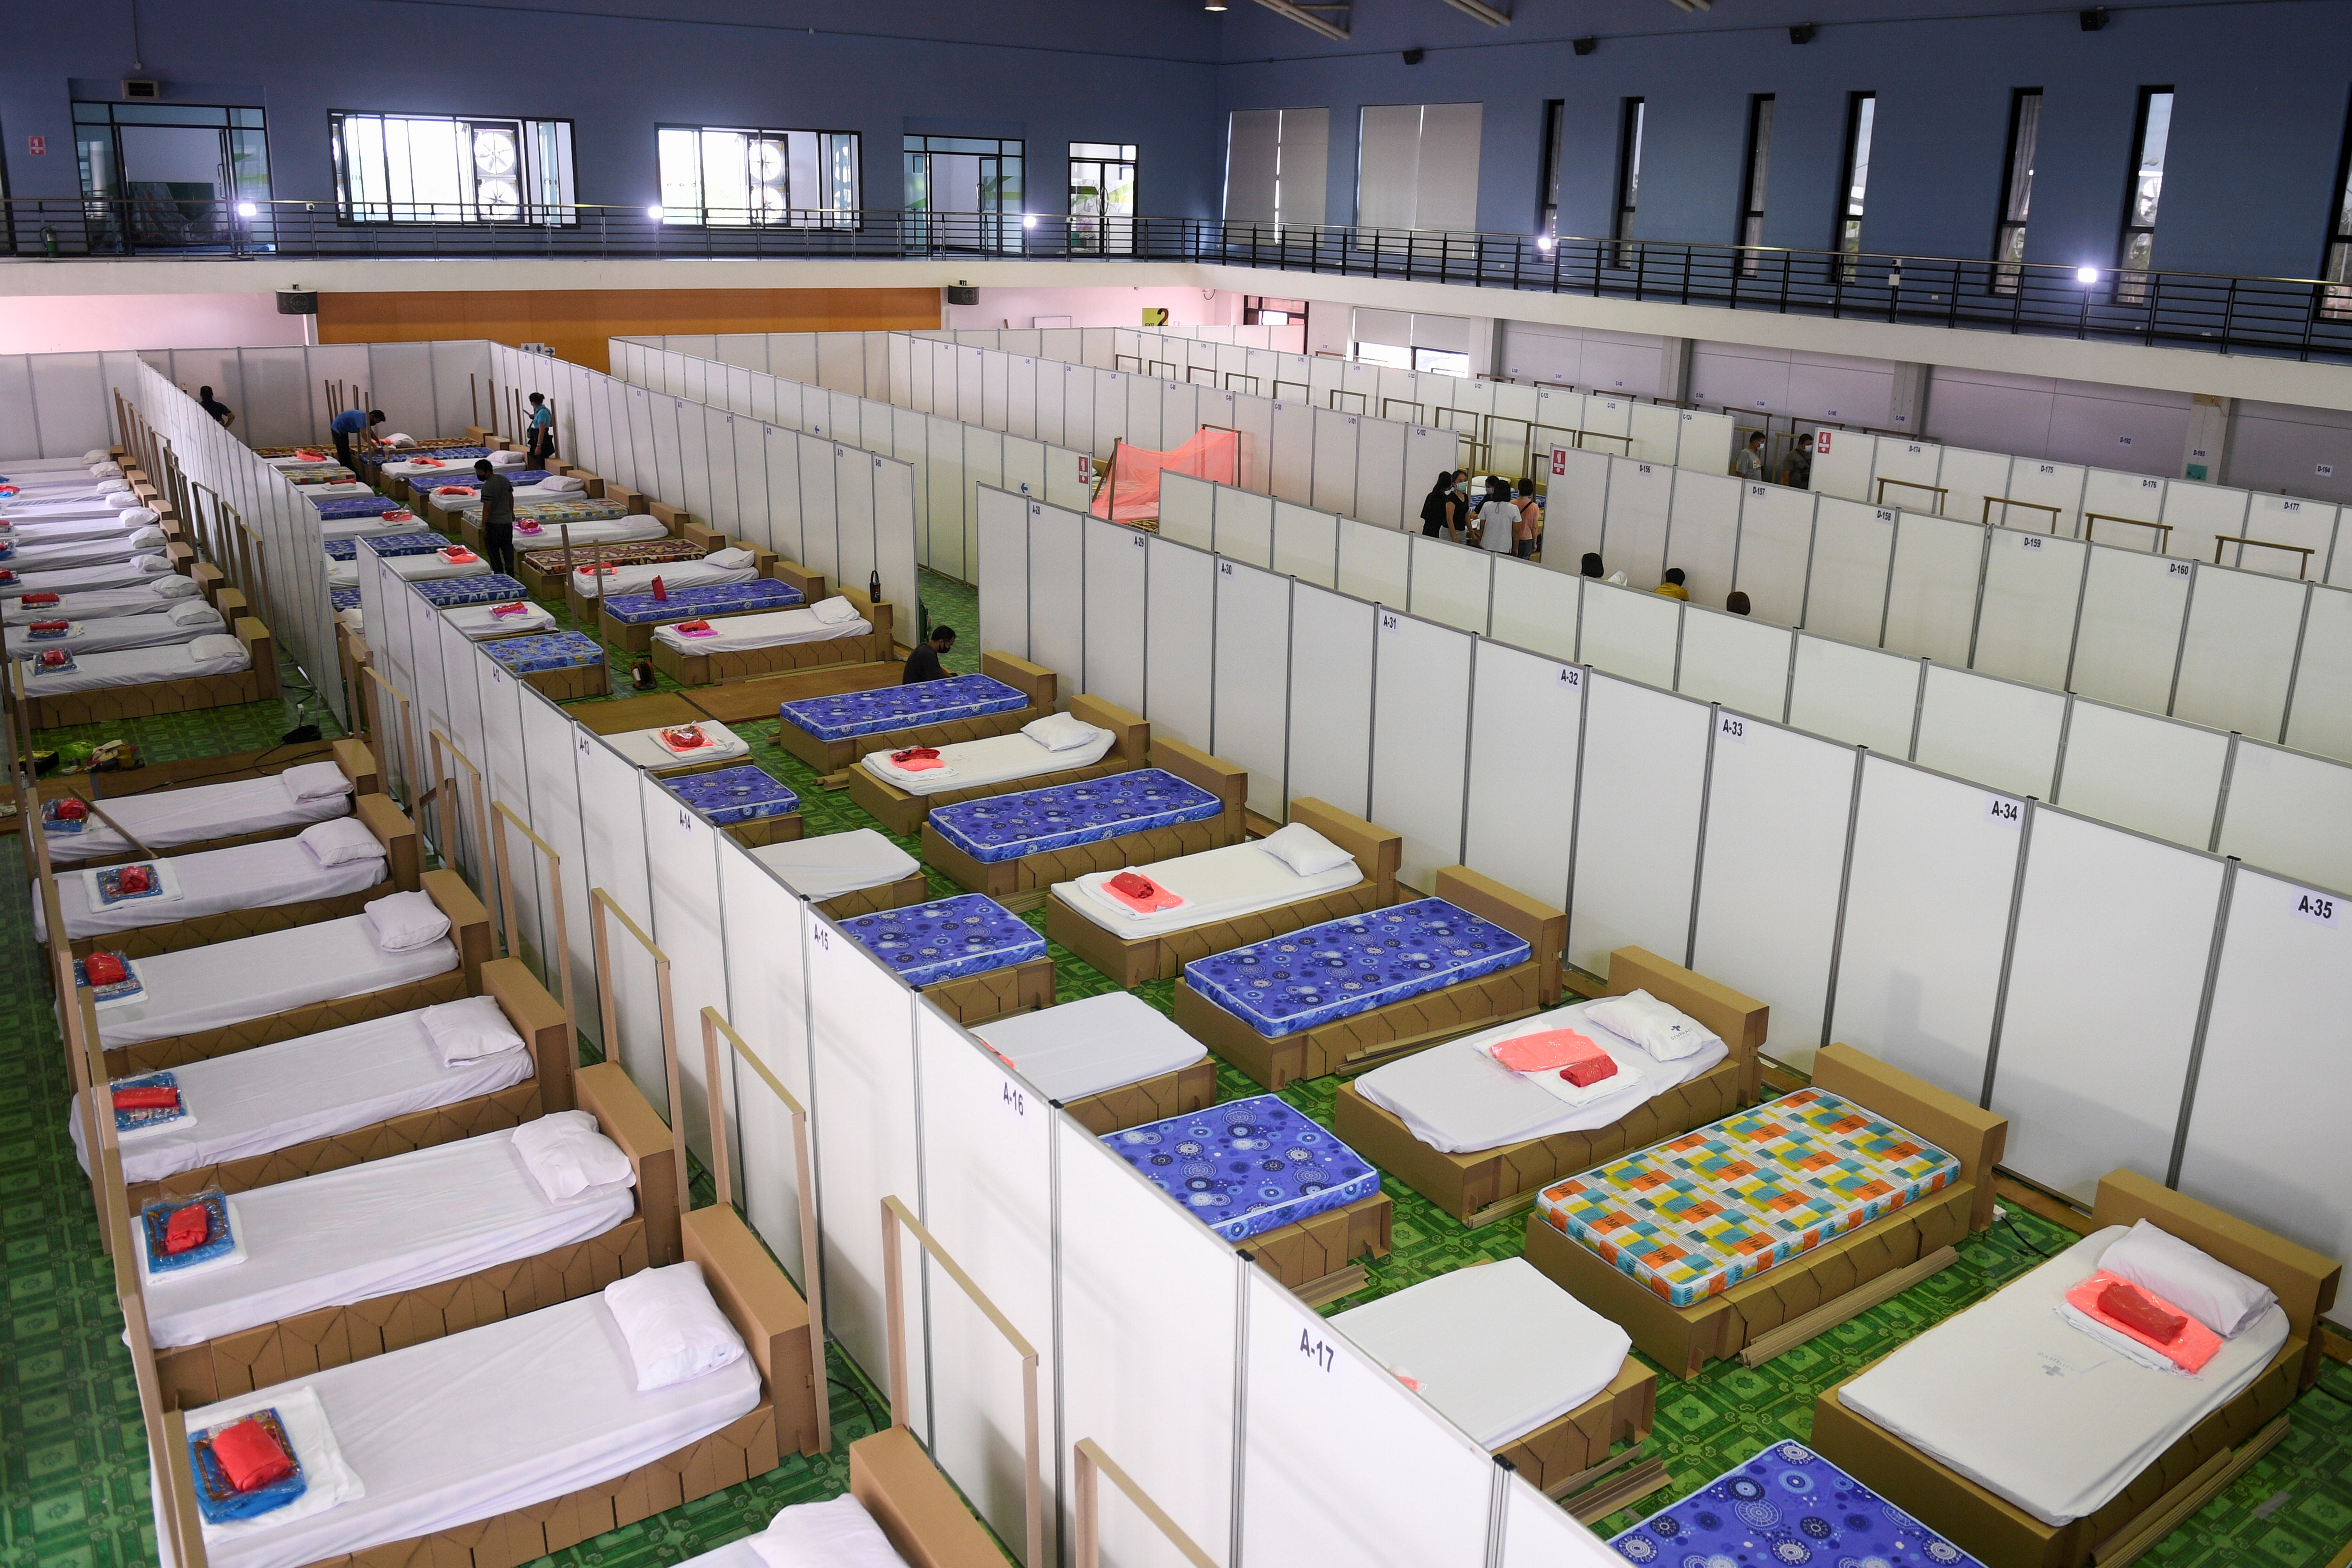 Empty beds are seen inside a field hospital recently set up to fight the spread of the coronavirus disease (COVID-19) as the country deals with a fresh wave of infections after tackling earlier outbreaks, in Bangkok, Thailand, April 12, 2021. REUTERS/Chalinee Thirasupa